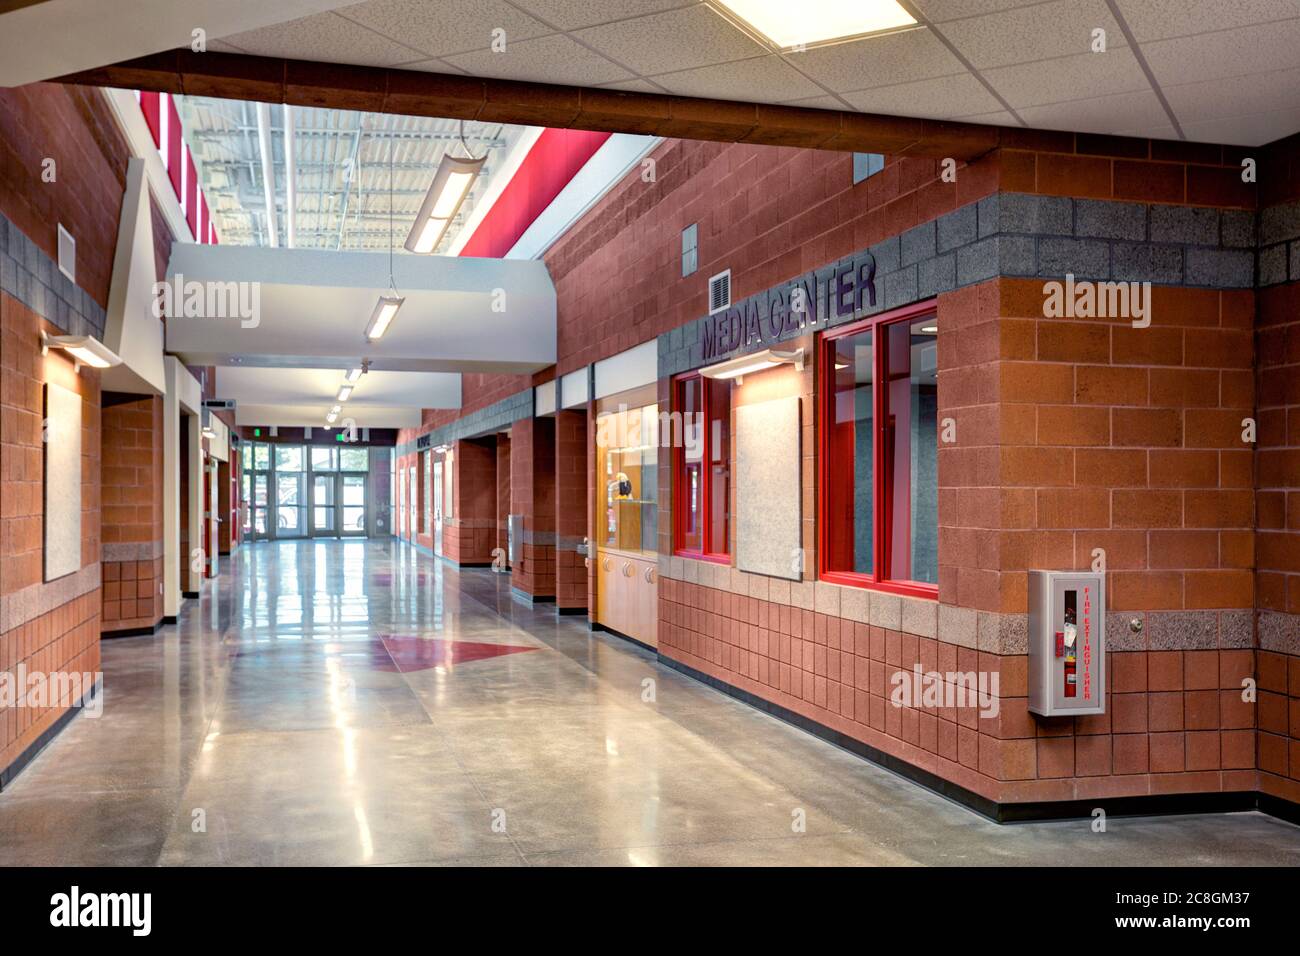 The main hallway in an elementary school, with money saving cnstruction materials, and High efficency computer controlled LED light fixtures. Stock Photo